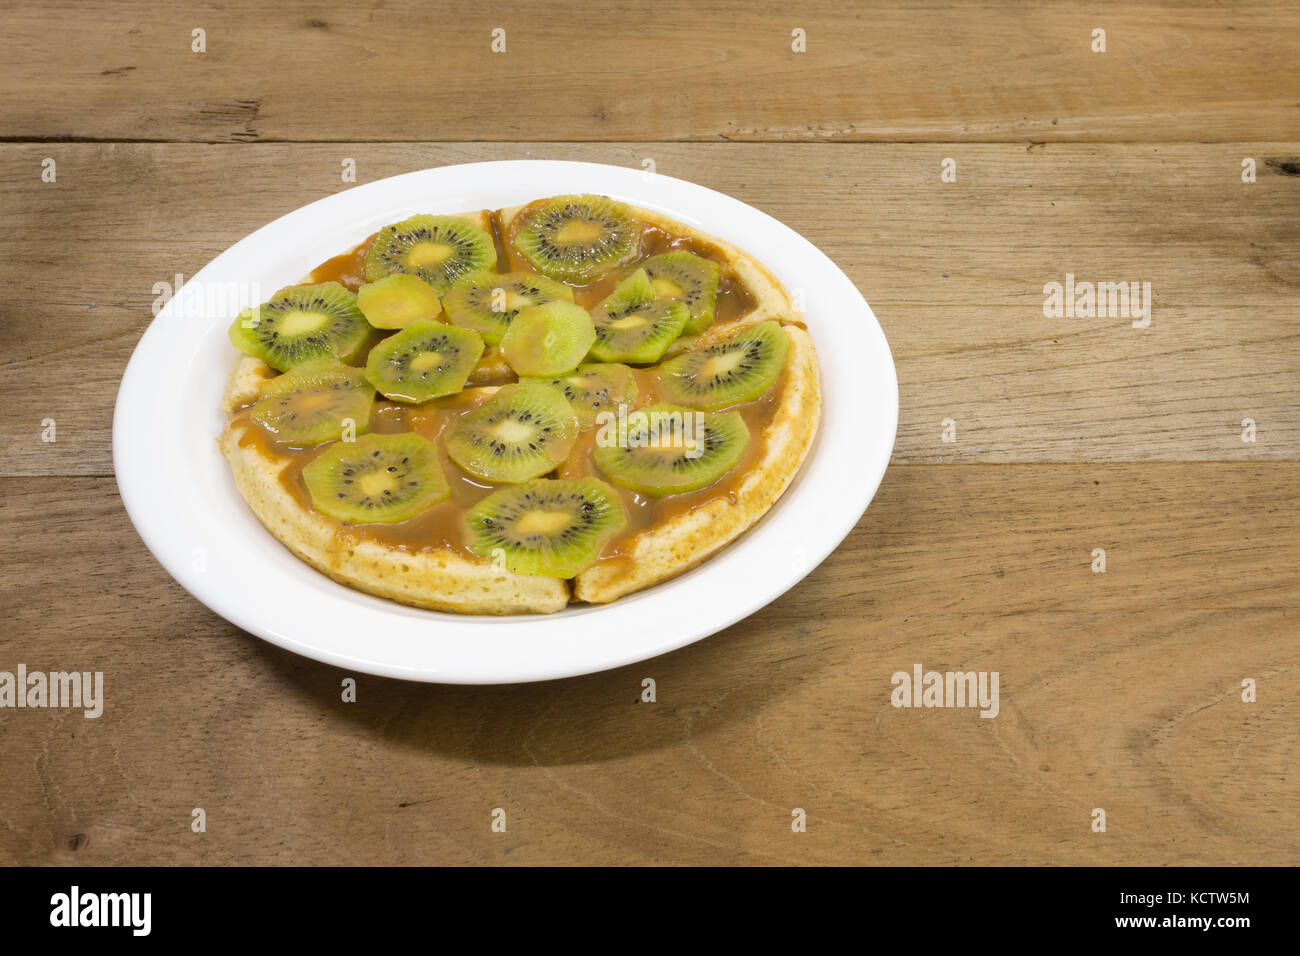 Waffle with milk caramel spread (Spanish: Dulce de leche) and kiwi fruit slices on white plate, on wooden background Stock Photo